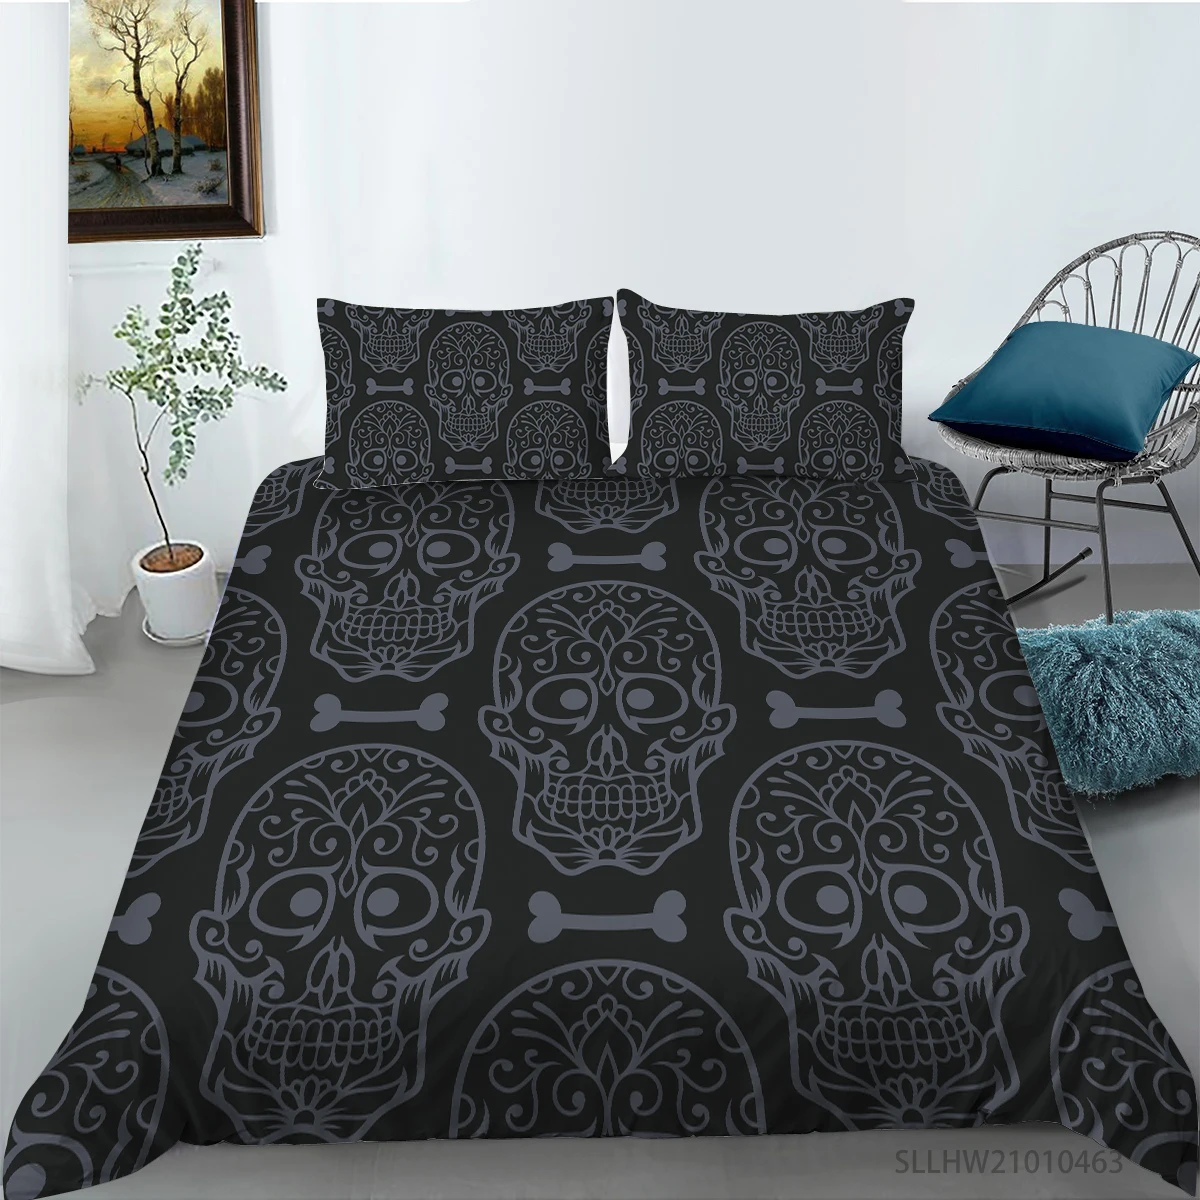 

New Arrival Black and Grey Printing Bedding set Duvet cover with pillowcases Twin Full Queen King sizes 2/3pcs